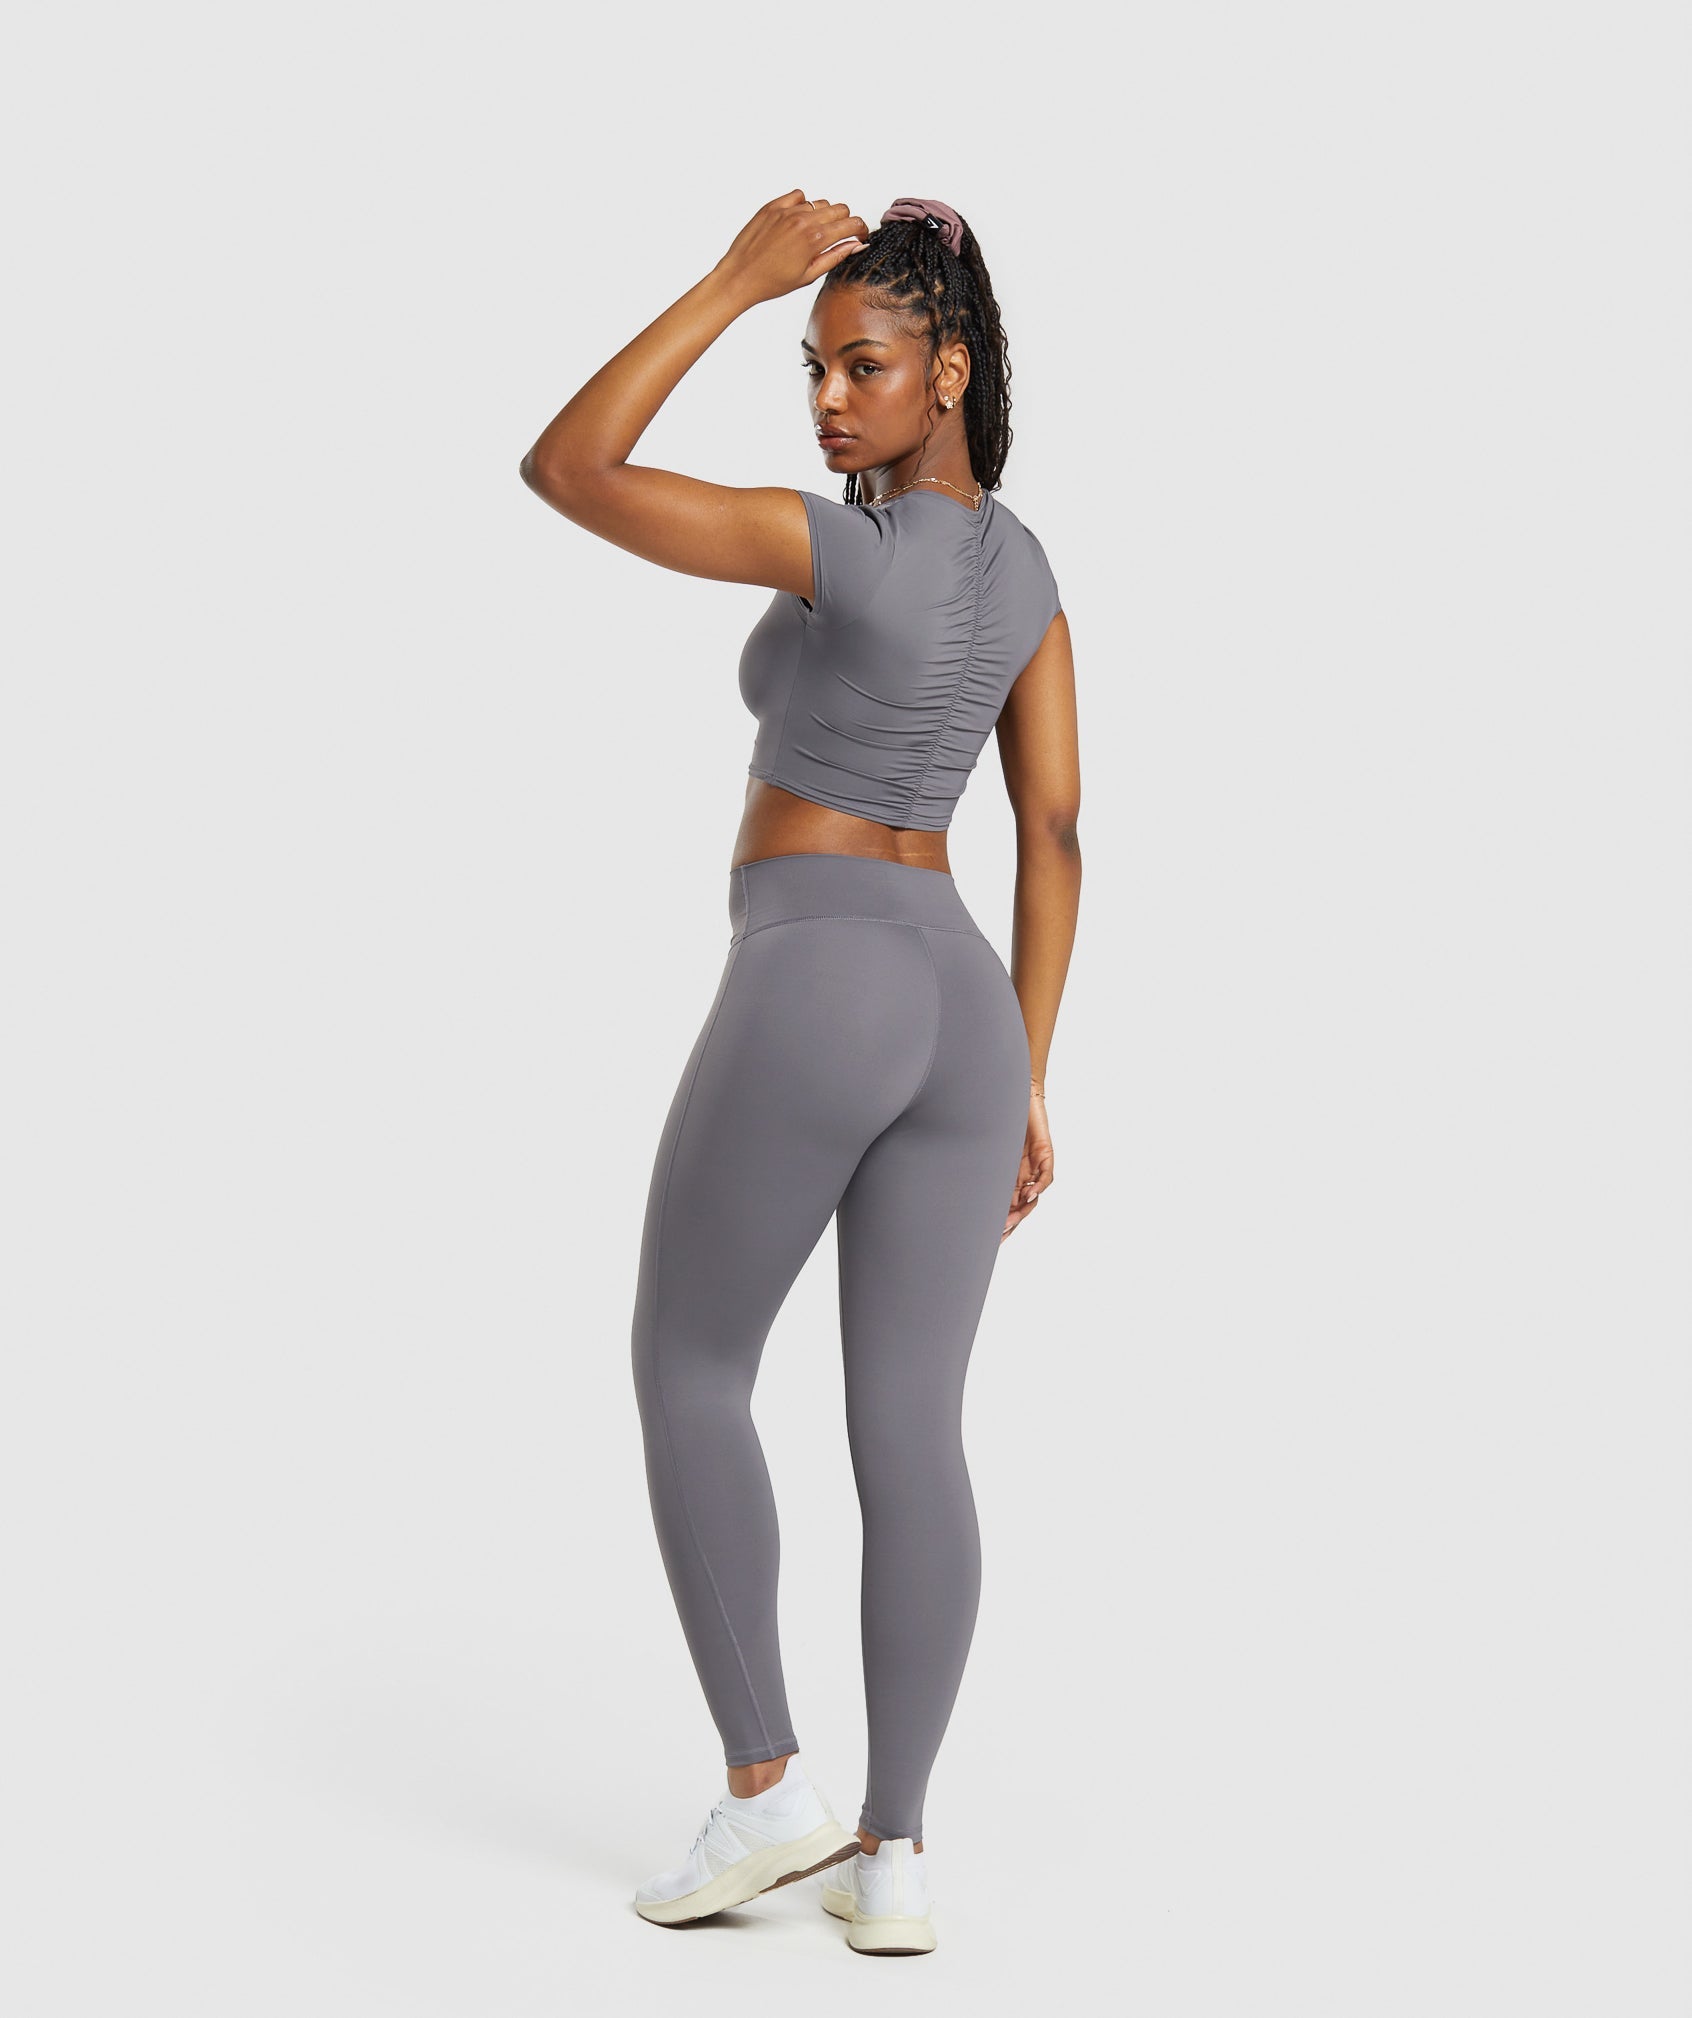 Elevate Ruched Crop Top in Brushed Grey - view 4